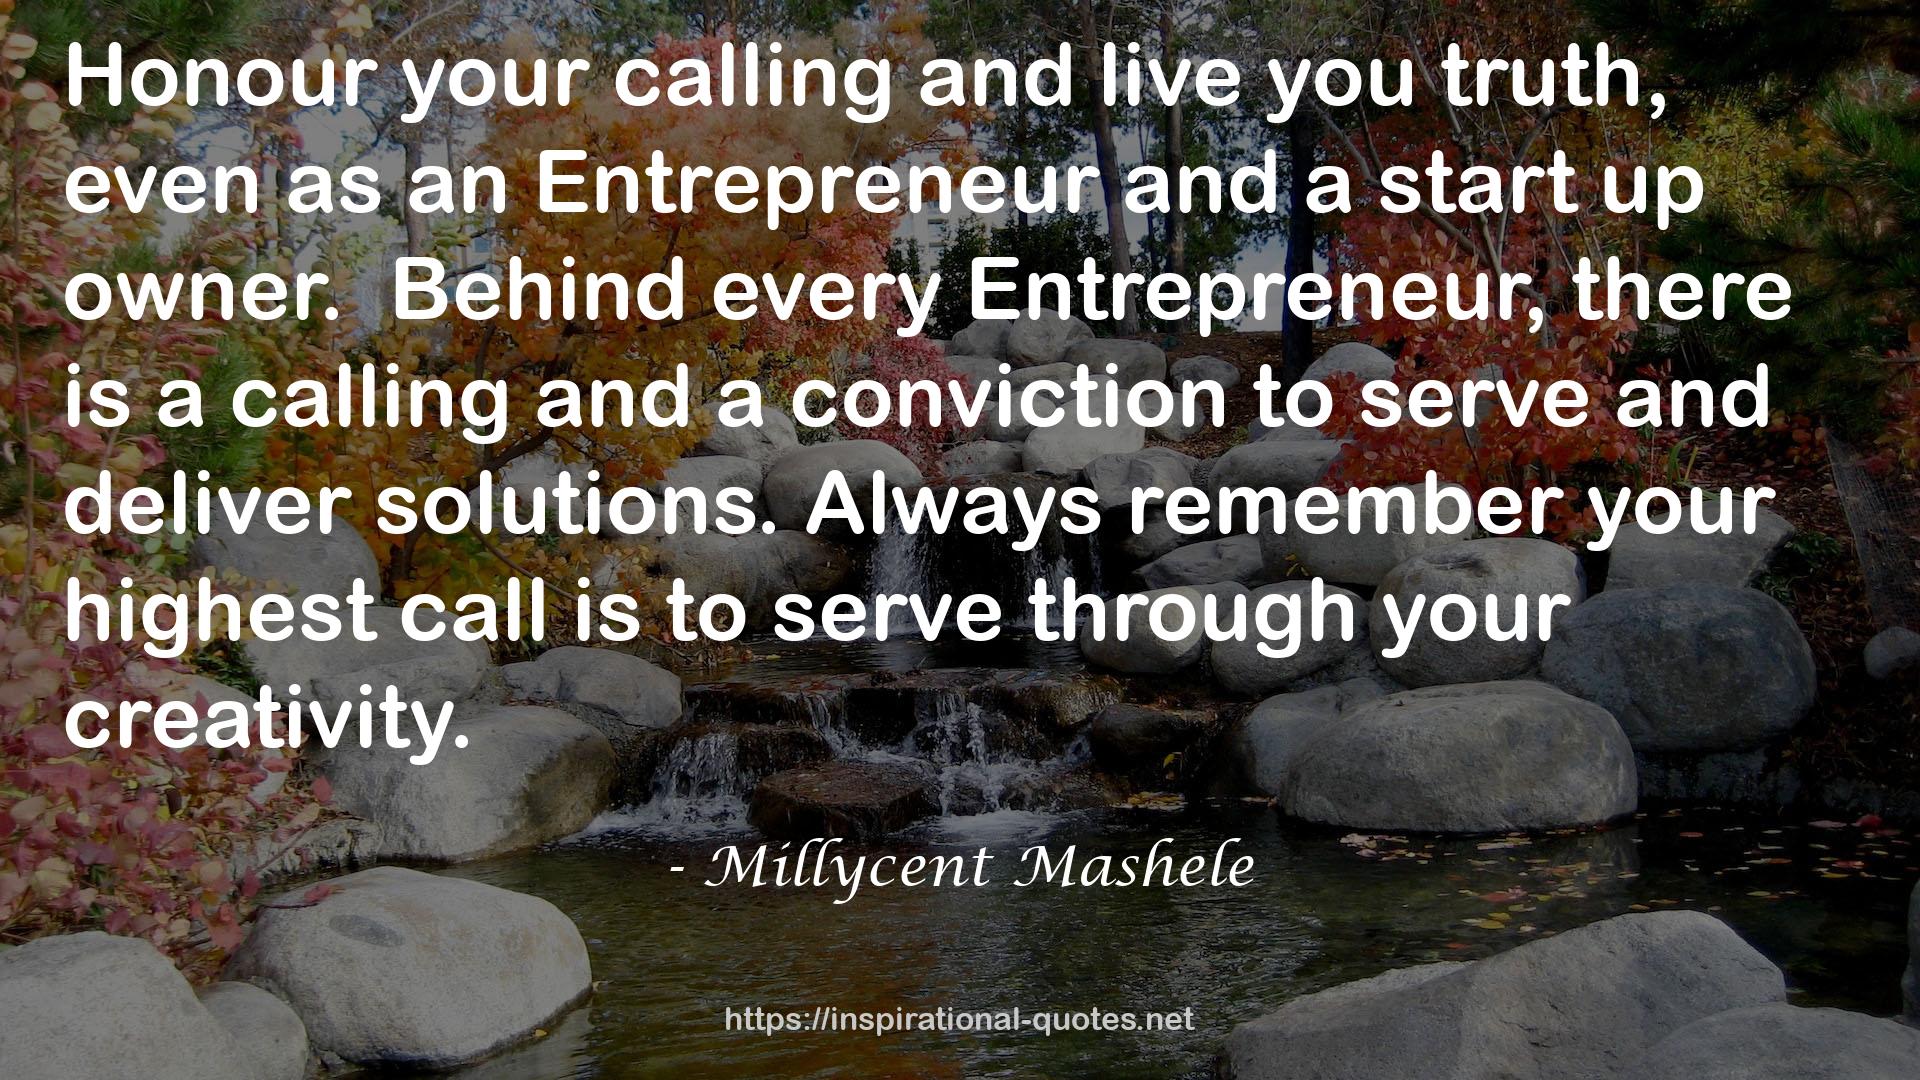 Millycent Mashele QUOTES